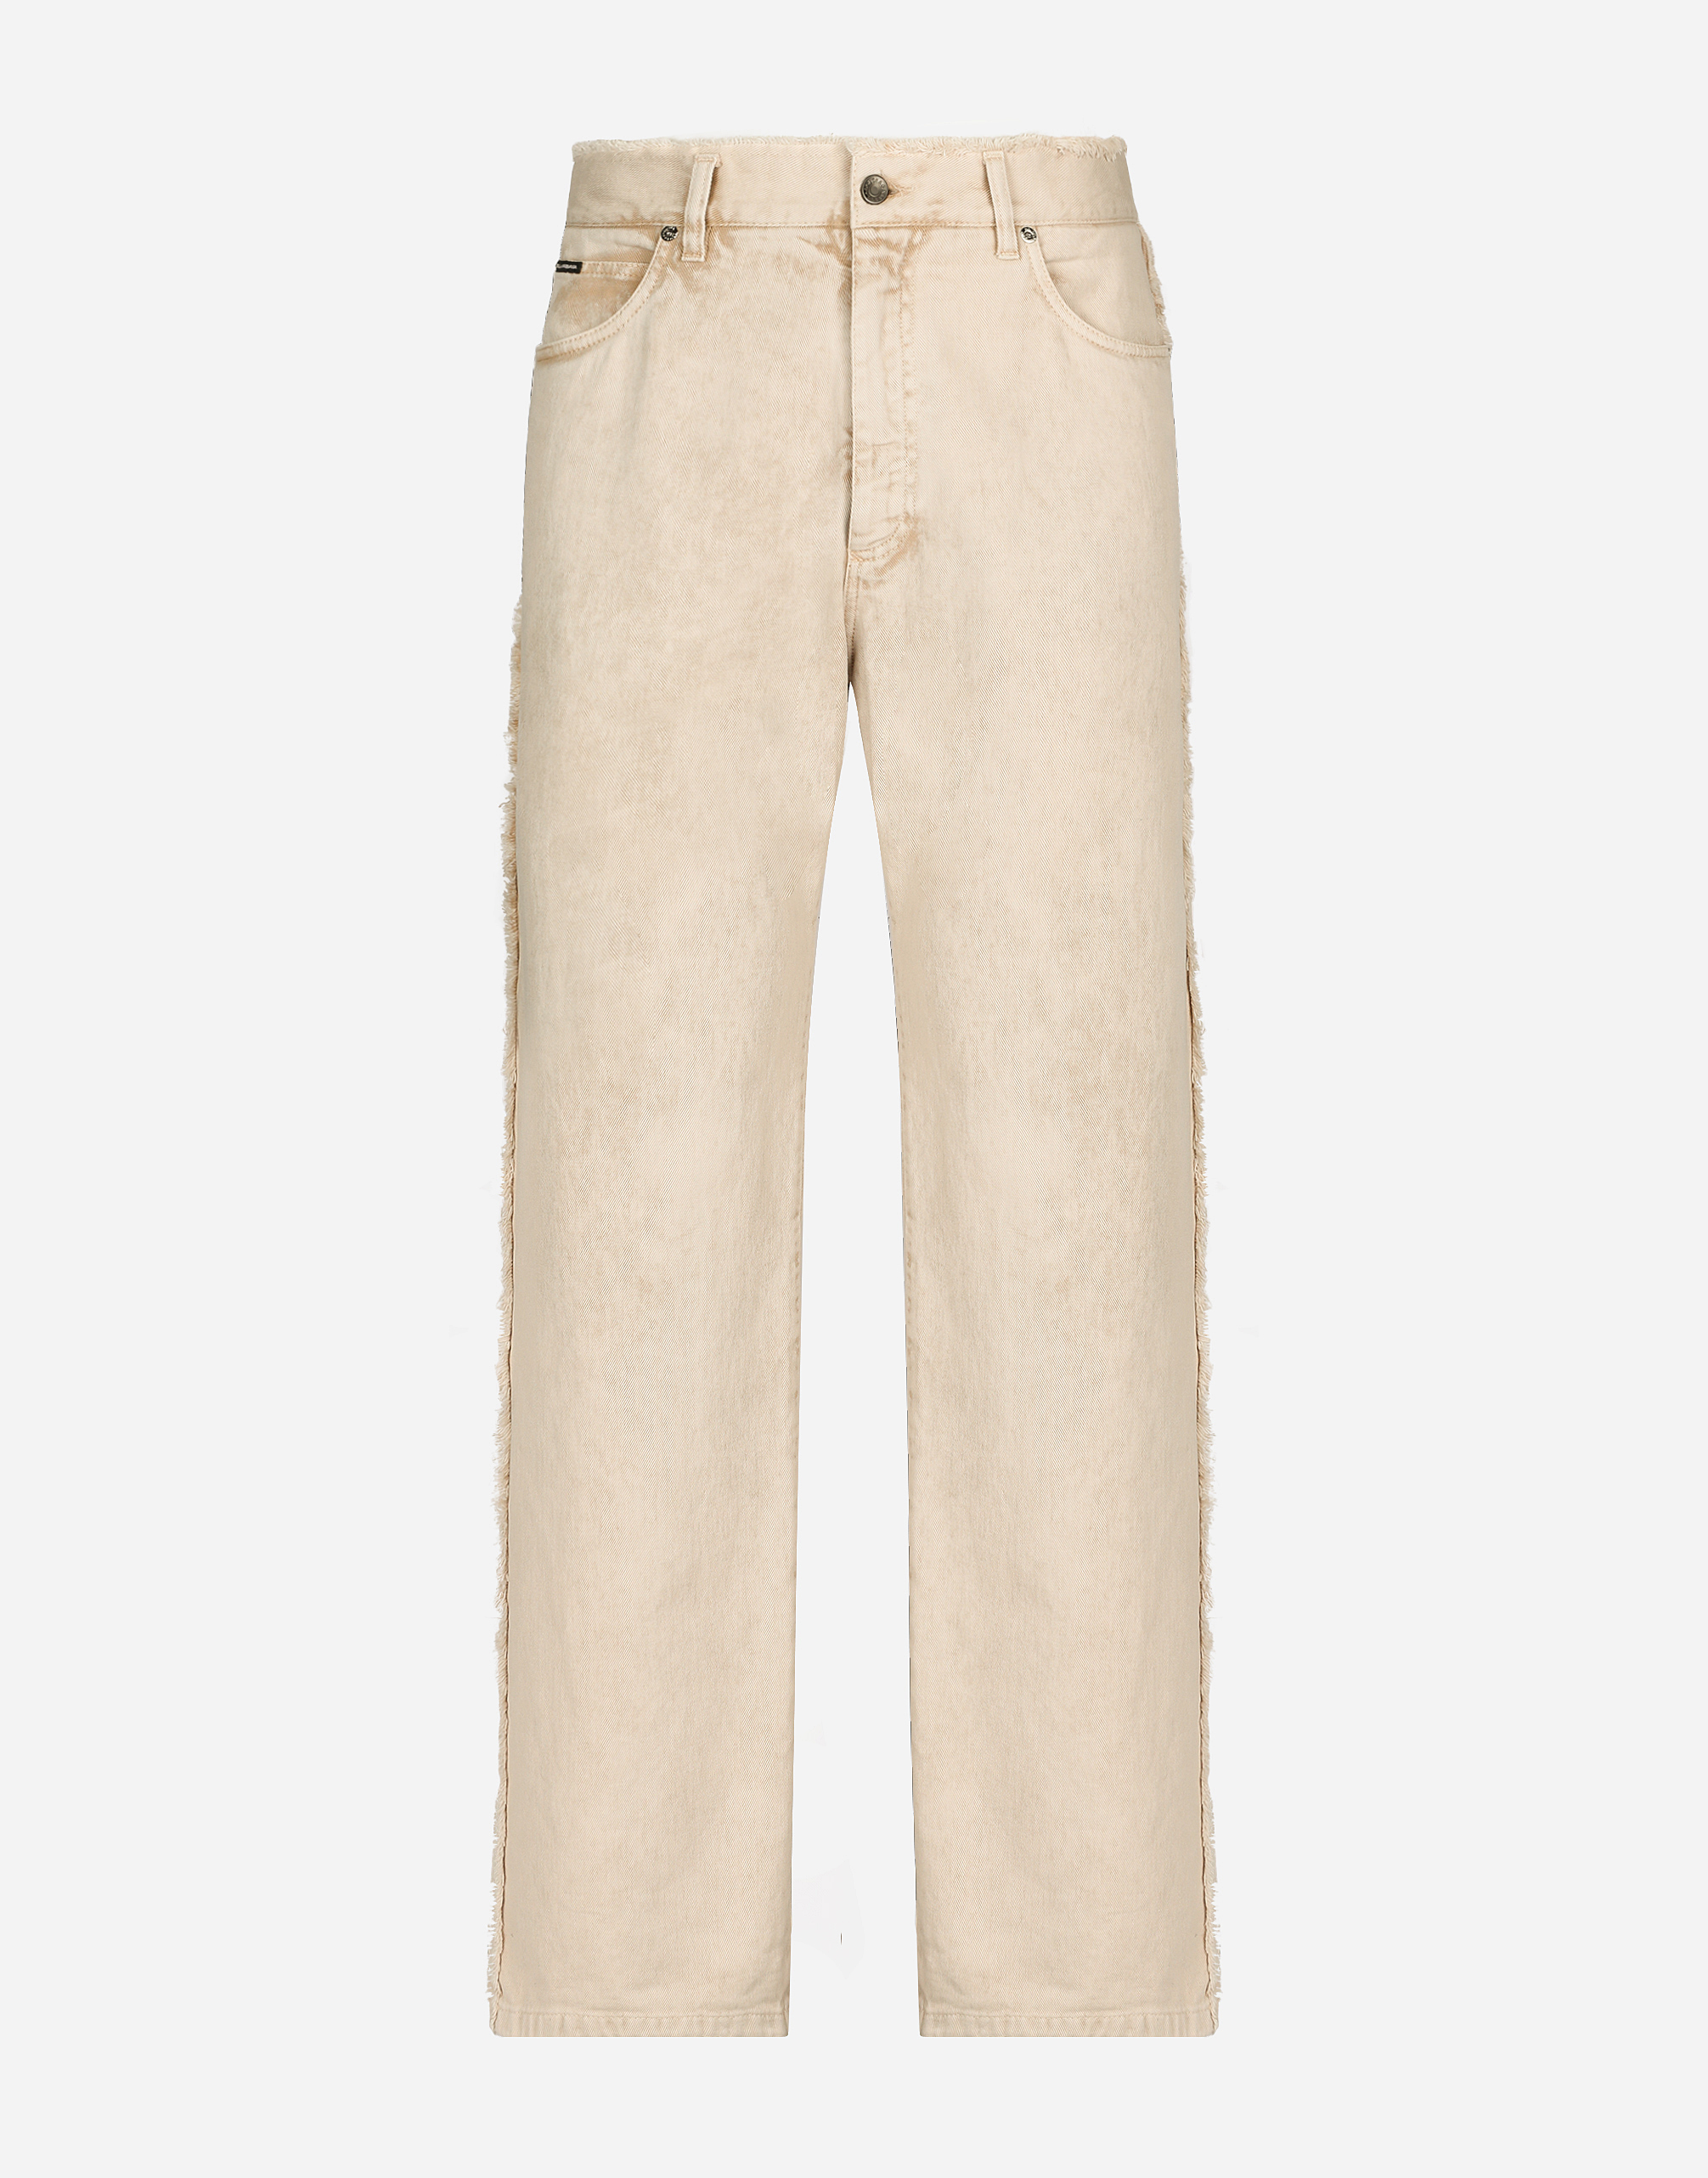 DOLCE & GABBANA OVERDYED JEANS WITH RAW HEM DETAILS